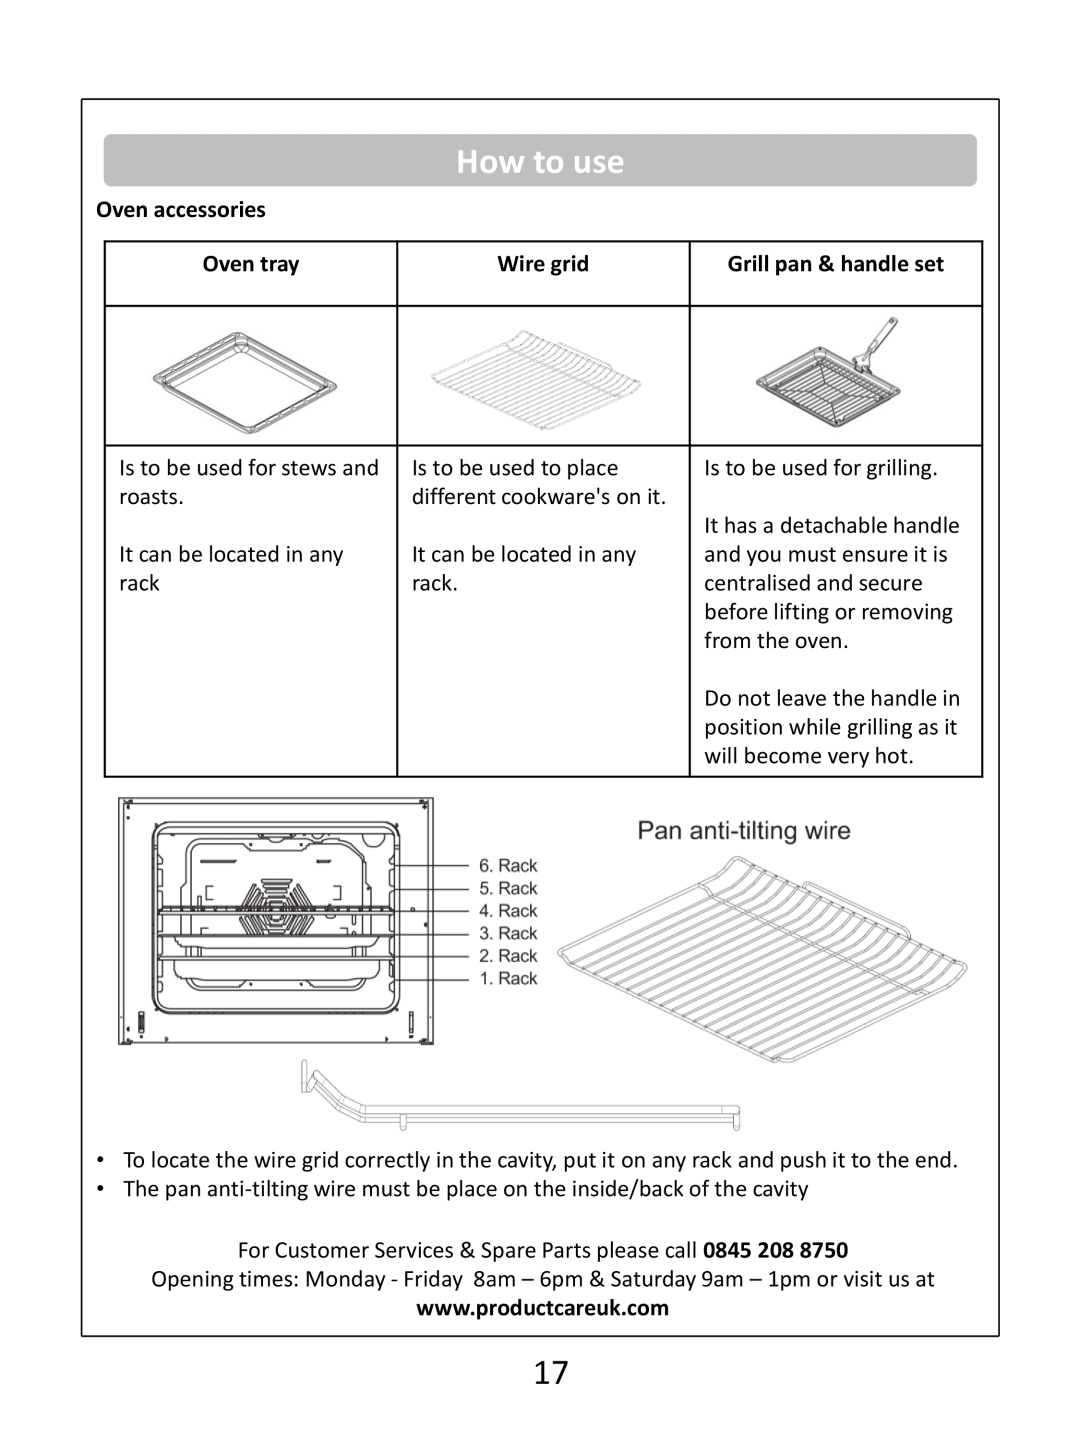 Russell Hobbs RHEC1 instruction manual How to use, Oven accessories, Oven tray, Wire grid, Grill pan & handle set 